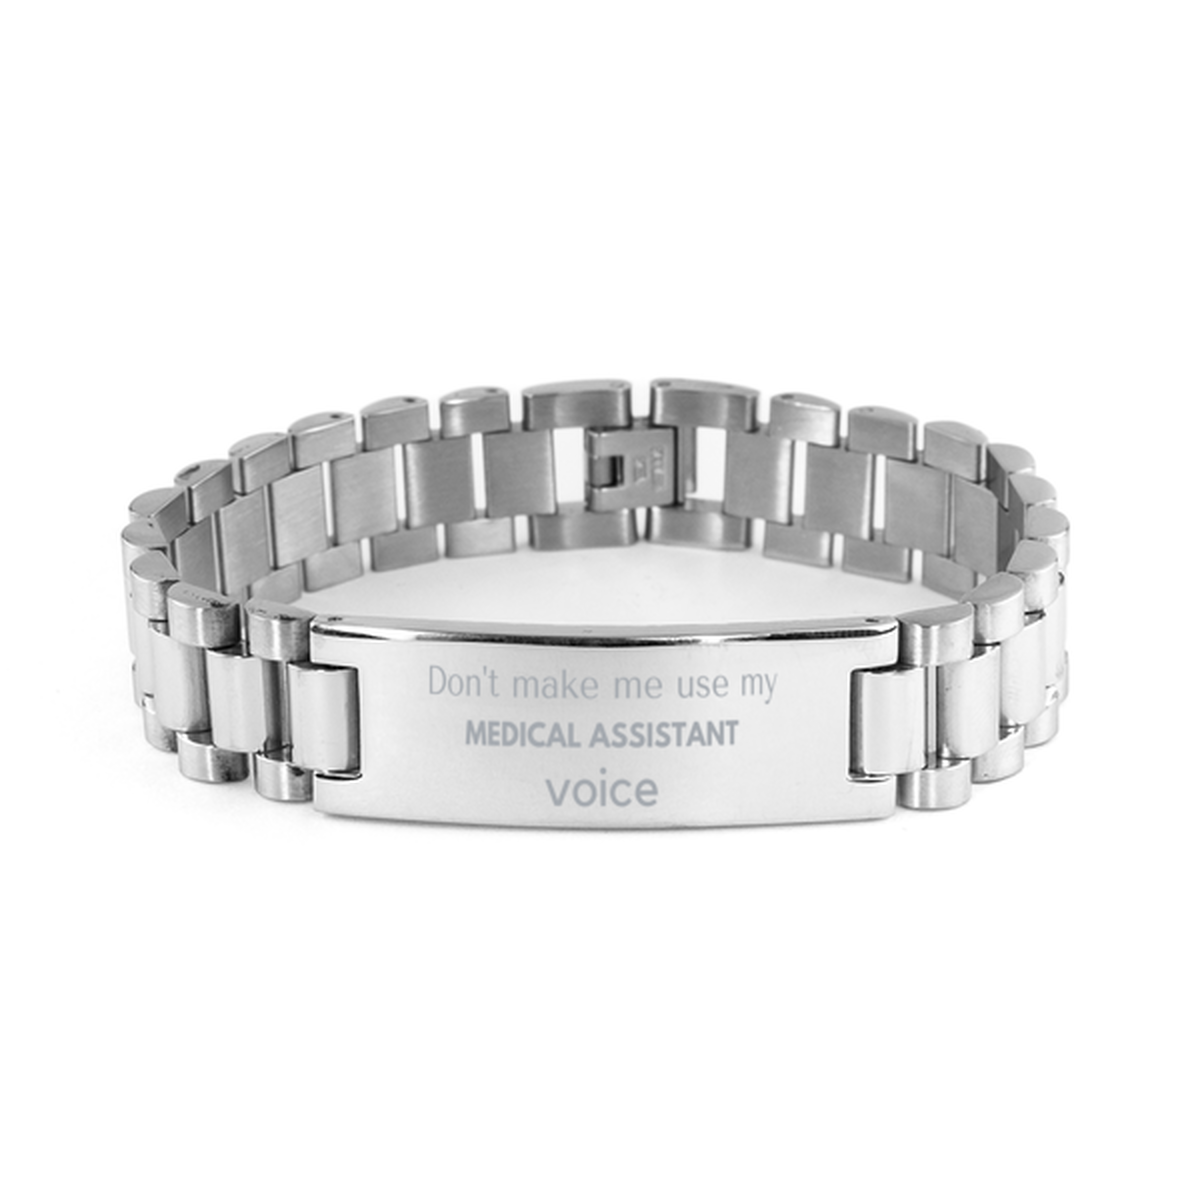 Don't make me use my Medical Assistant voice, Sarcasm Medical Assistant Gifts, Christmas Medical Assistant Ladder Stainless Steel Bracelet Birthday Unique Gifts For Medical Assistant Coworkers, Men, Women, Colleague, Friends